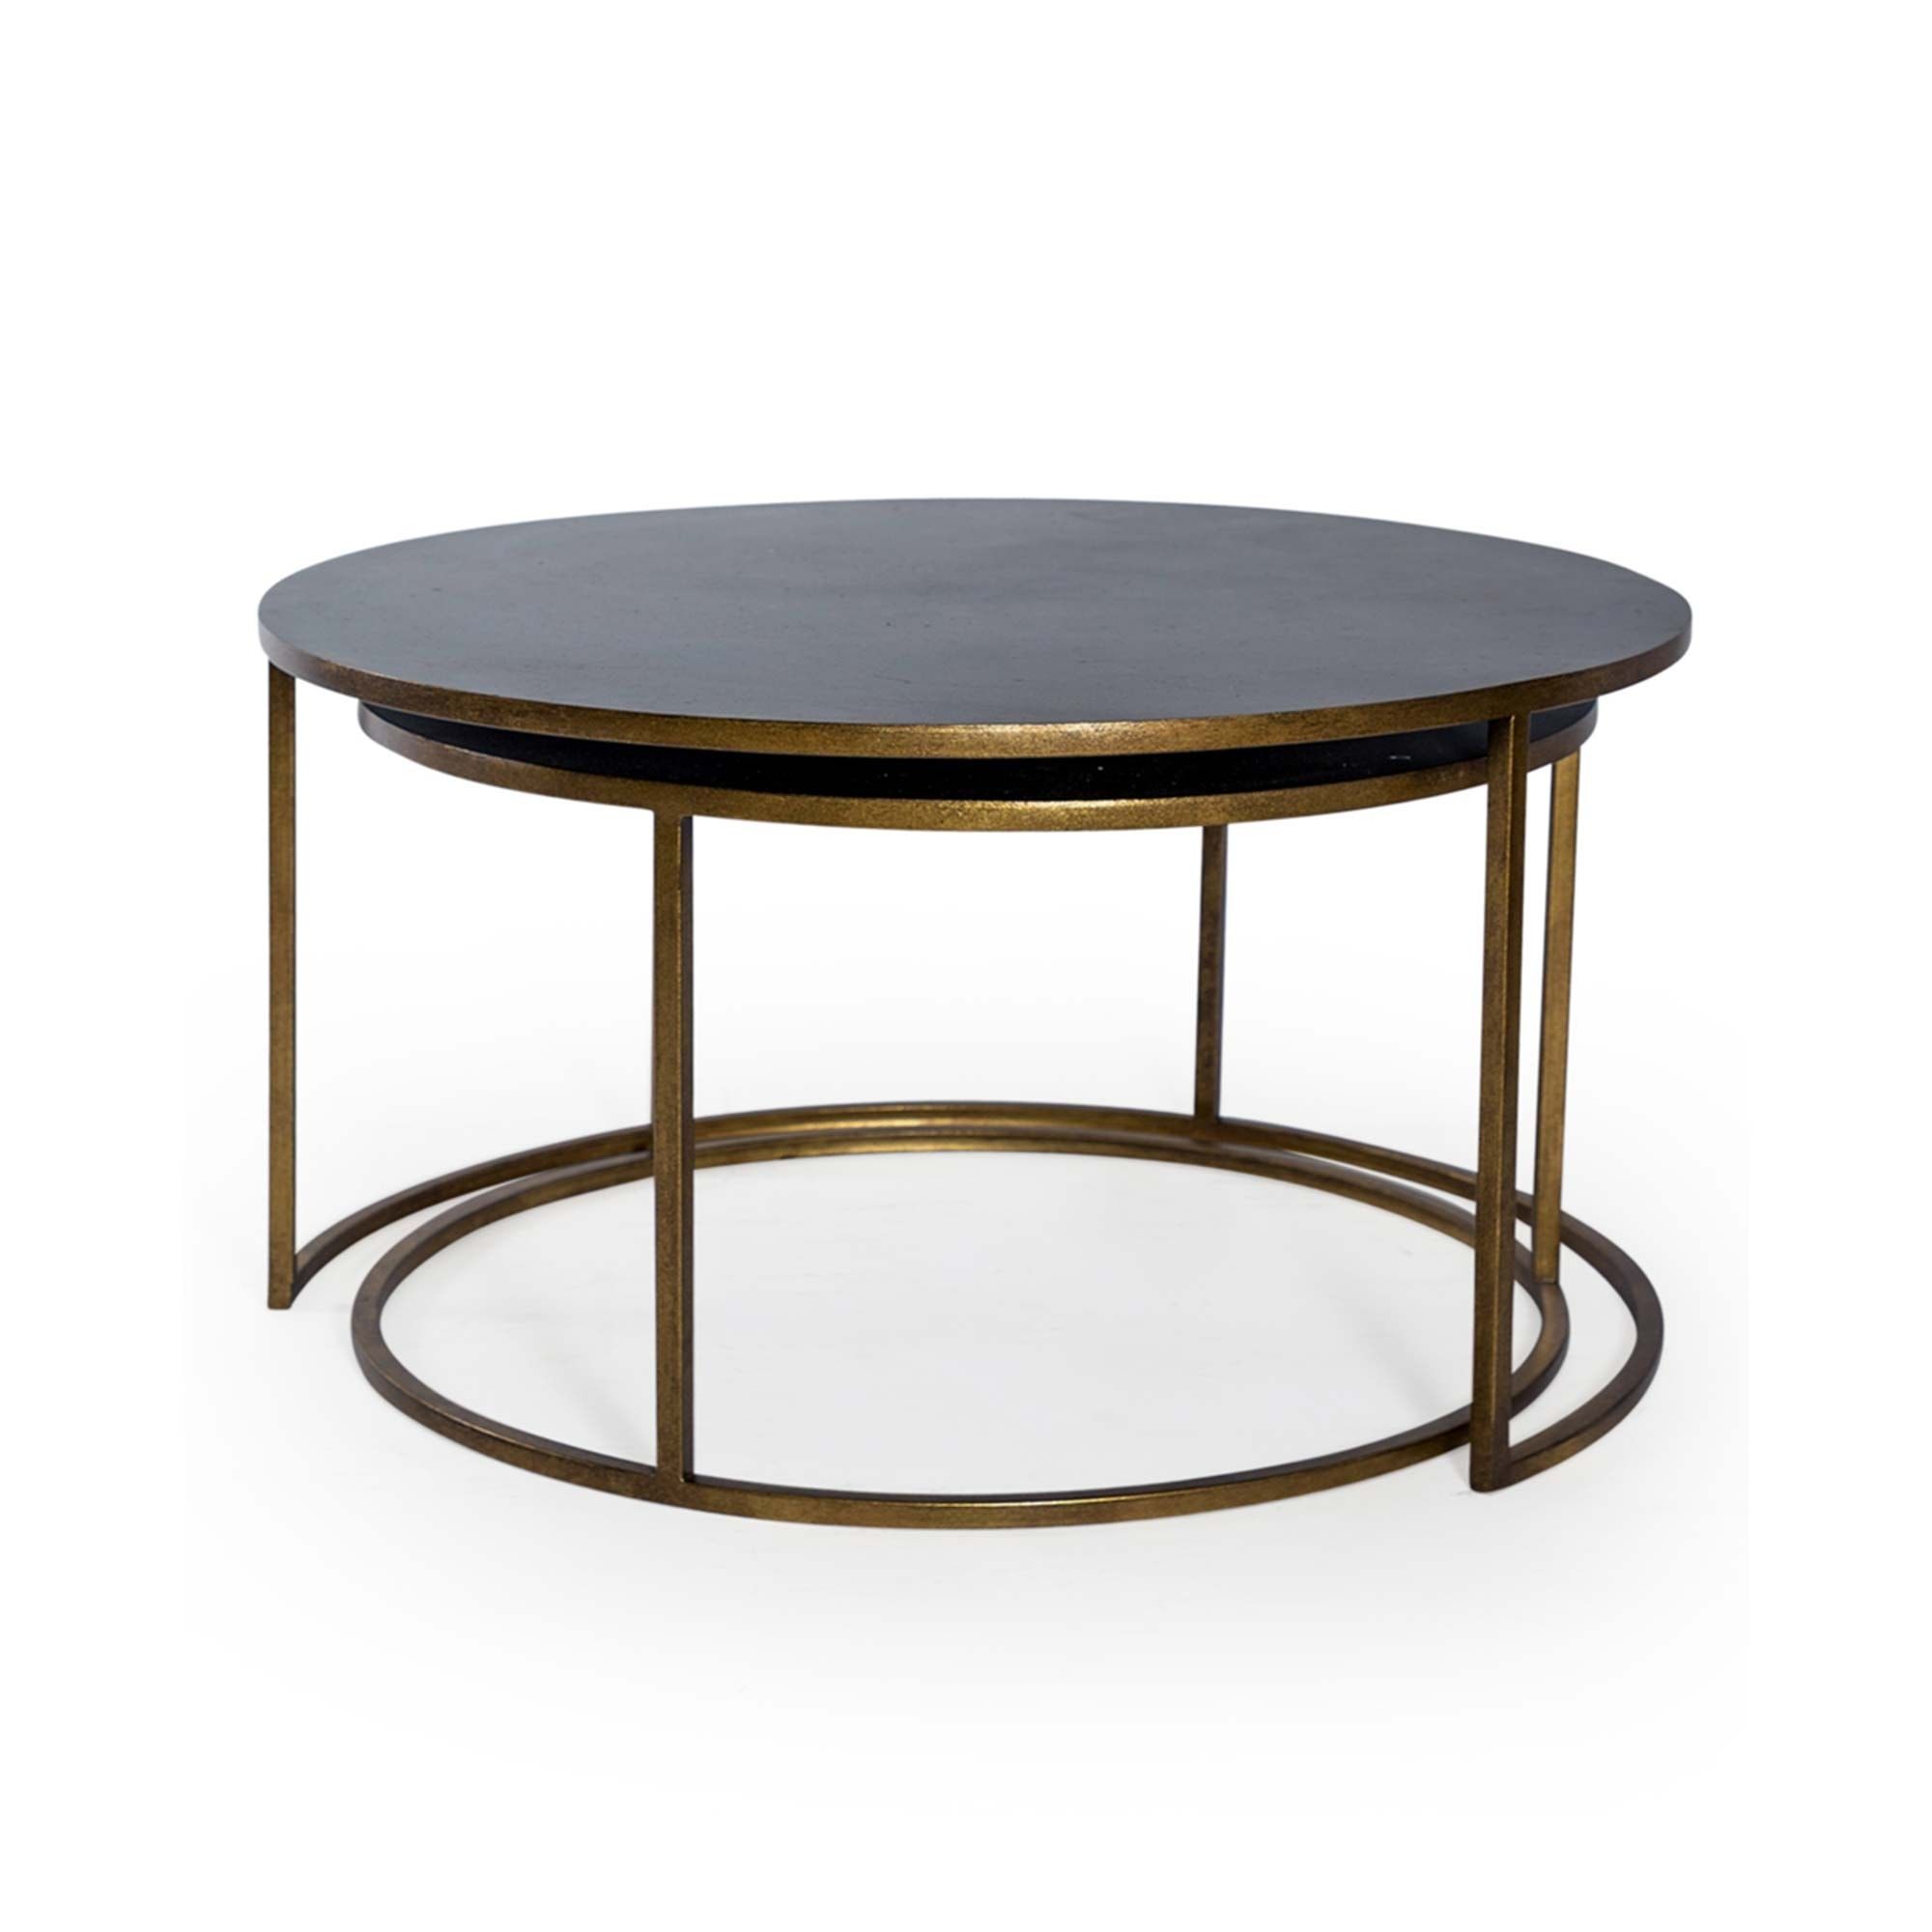 Nest Of 2 Antique Gold And Bronze Metal Coffee Tables | Nest Of Tables In Bronze Metal Coffee Tables (View 5 of 15)